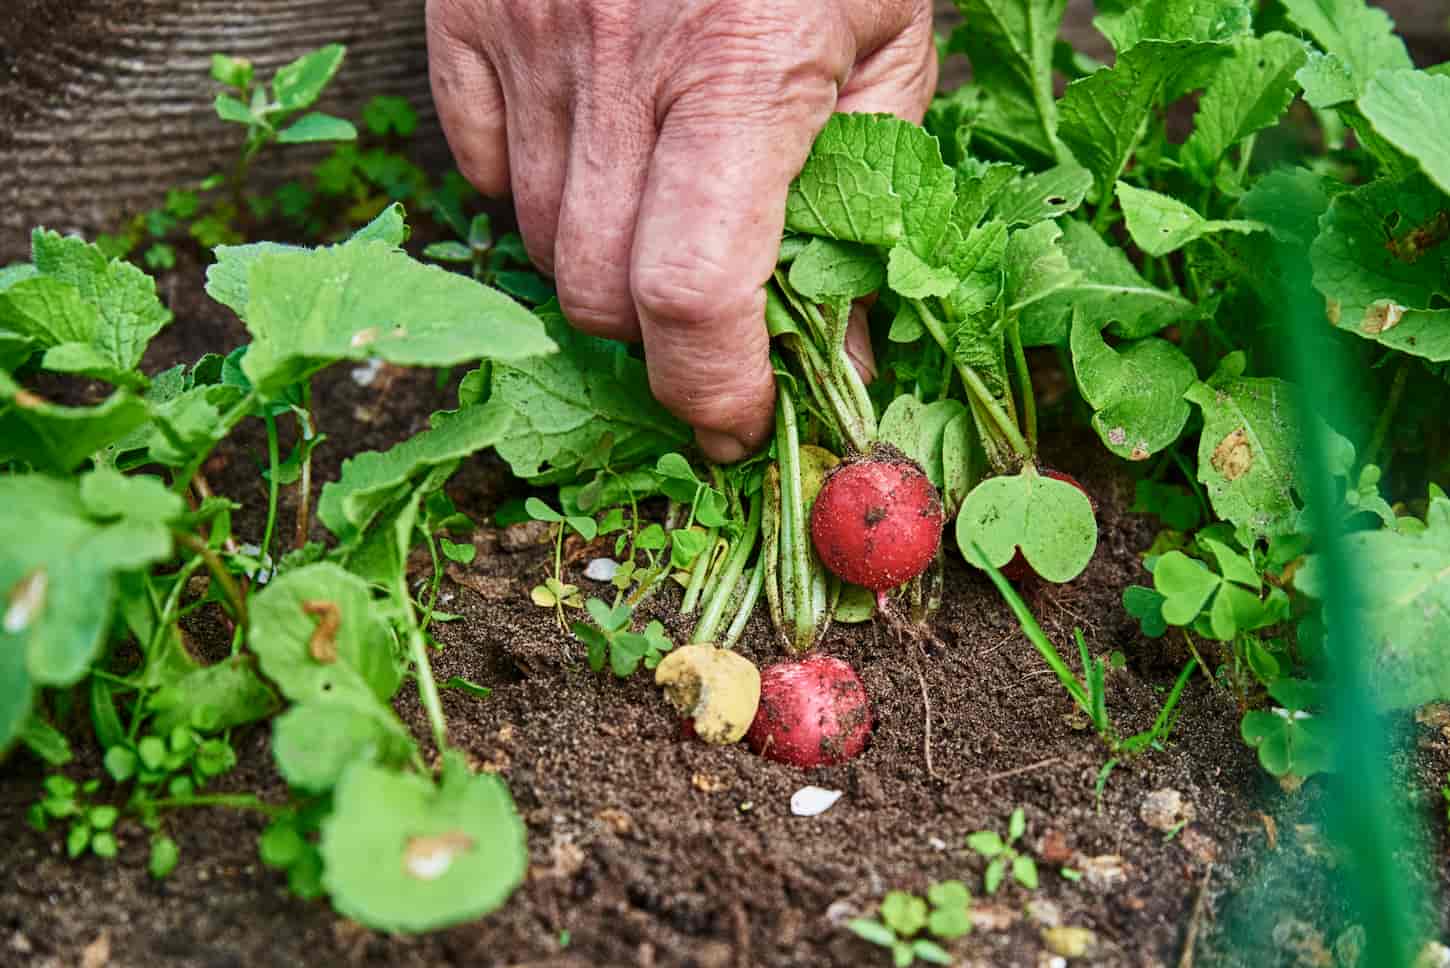 An image of a Woman's hands holding or picking fresh radish harvest in the garden.